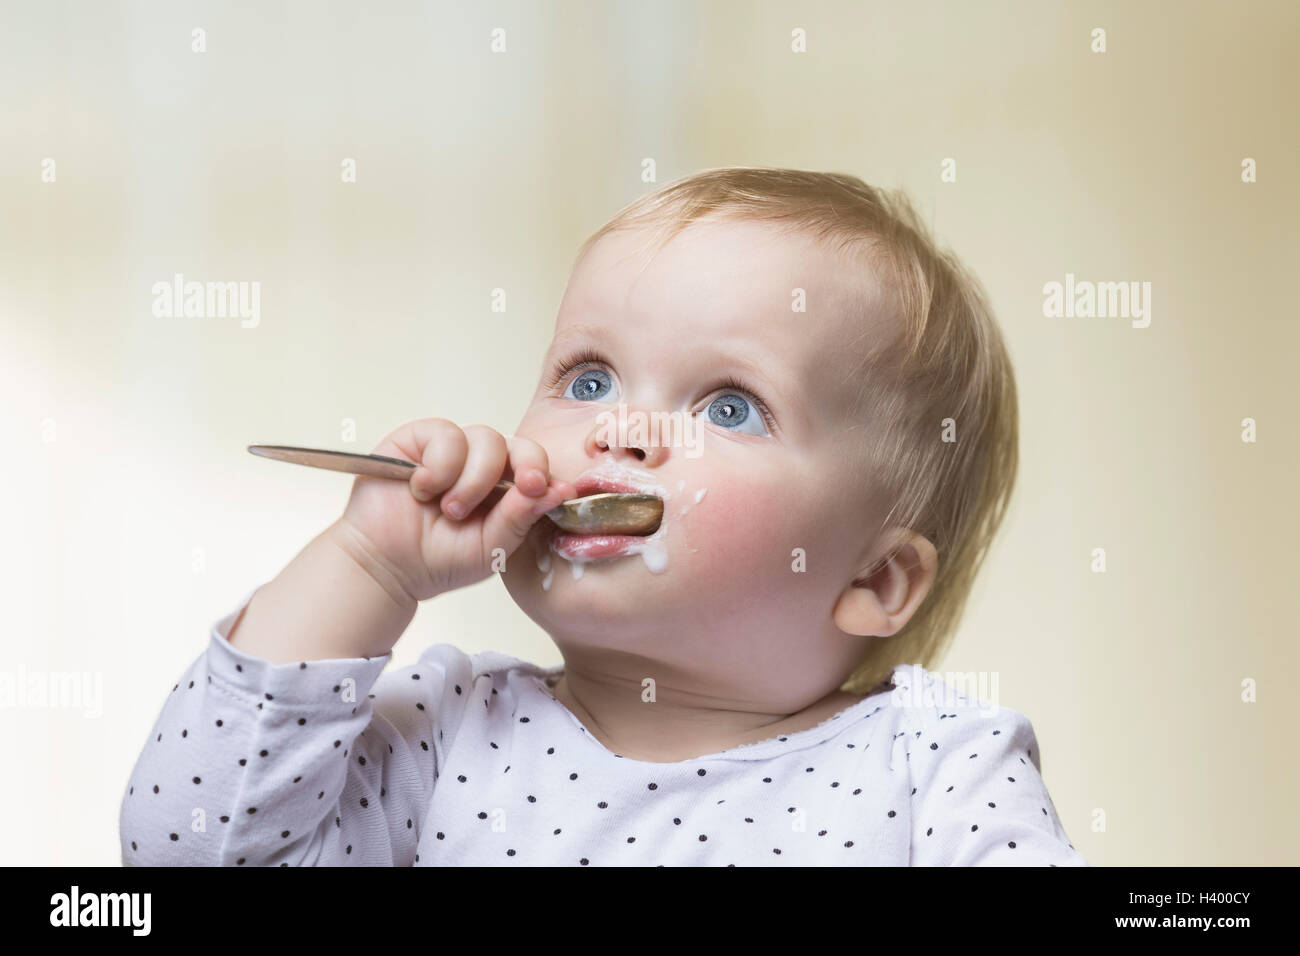 Close-up of girl with messy face holding spoon in mouth Stock Photo